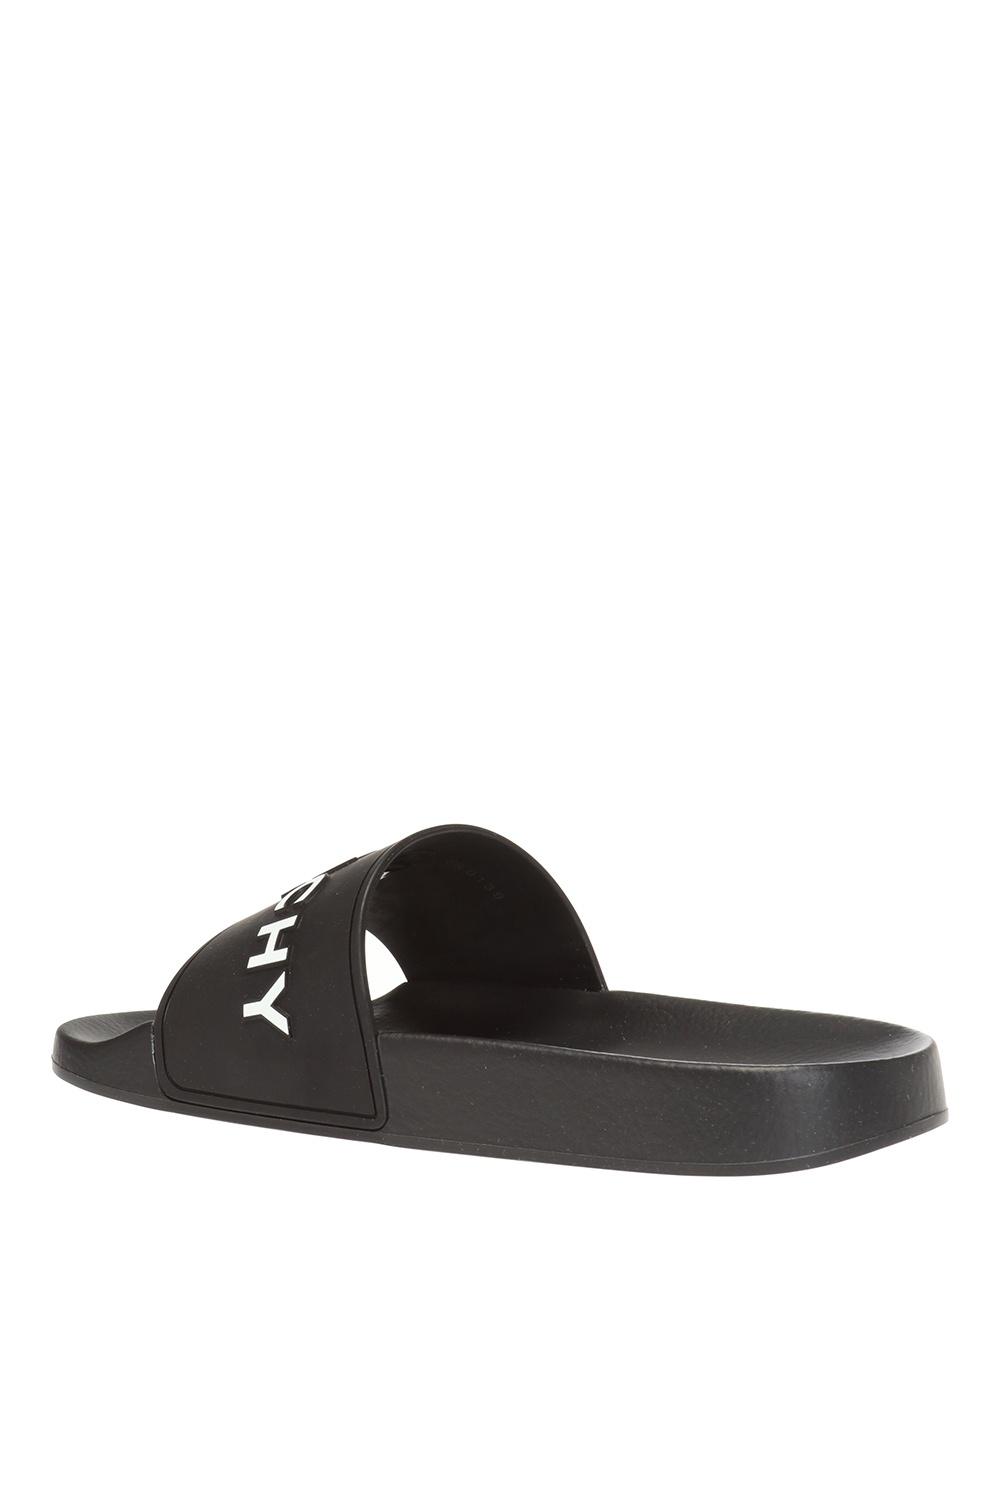 GIVENCHY BELT WITH LOGO | Givenchy Slides with tactile logo | IetpShops |  Women's Shoes